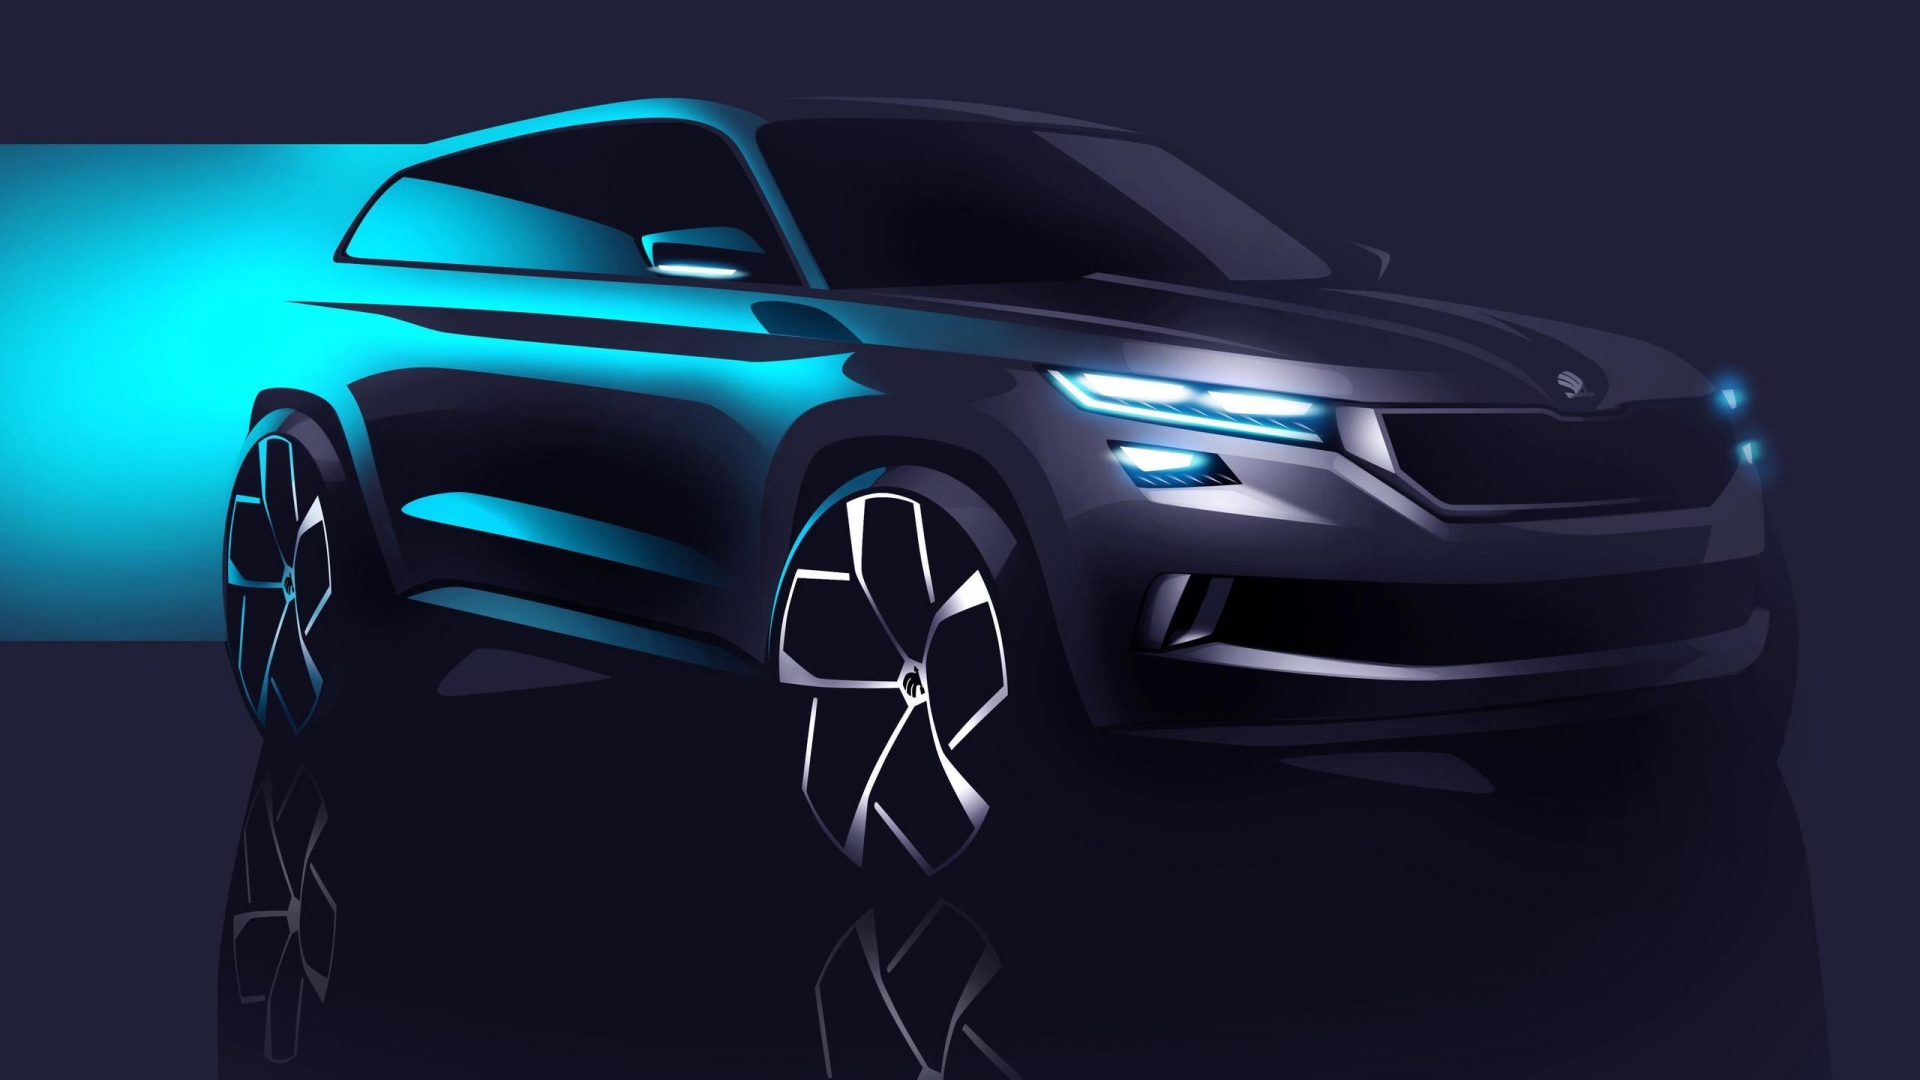 2016 Skoda Visions Concept for 1920 x 1080 HDTV 1080p resolution